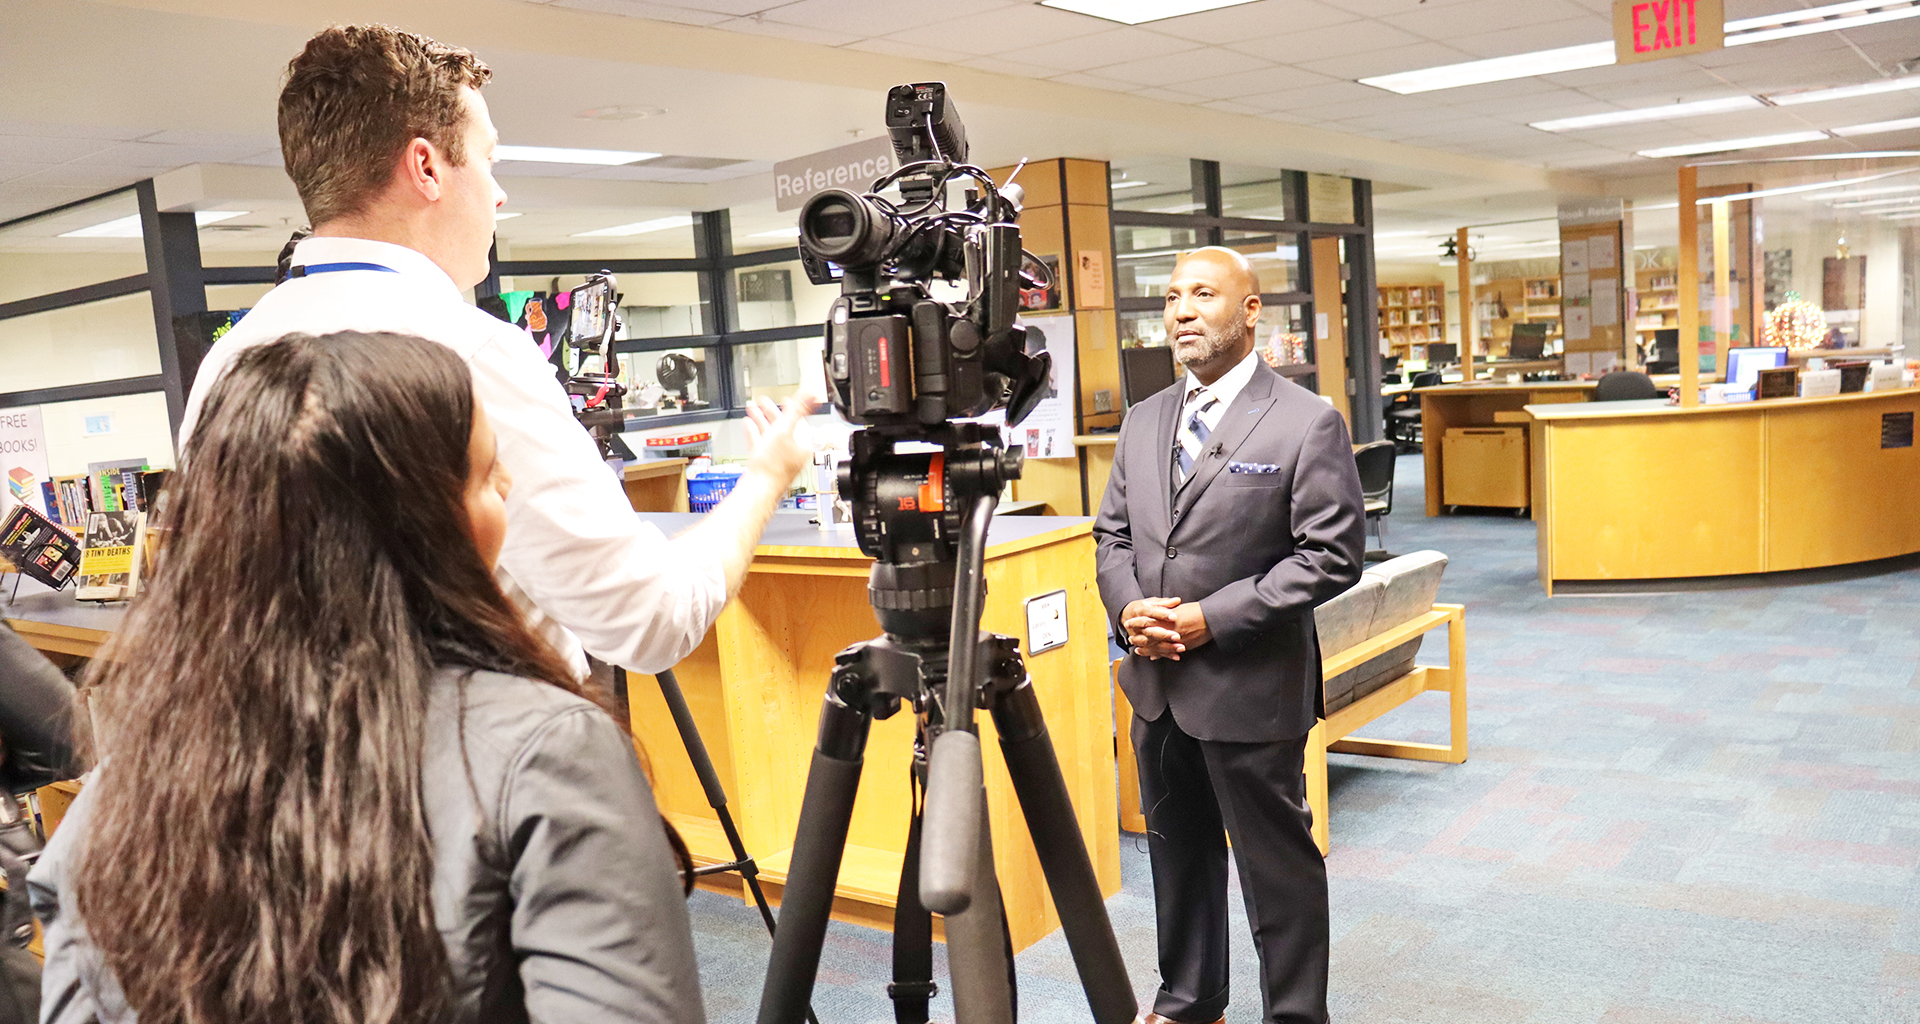 Principal being filmed by students